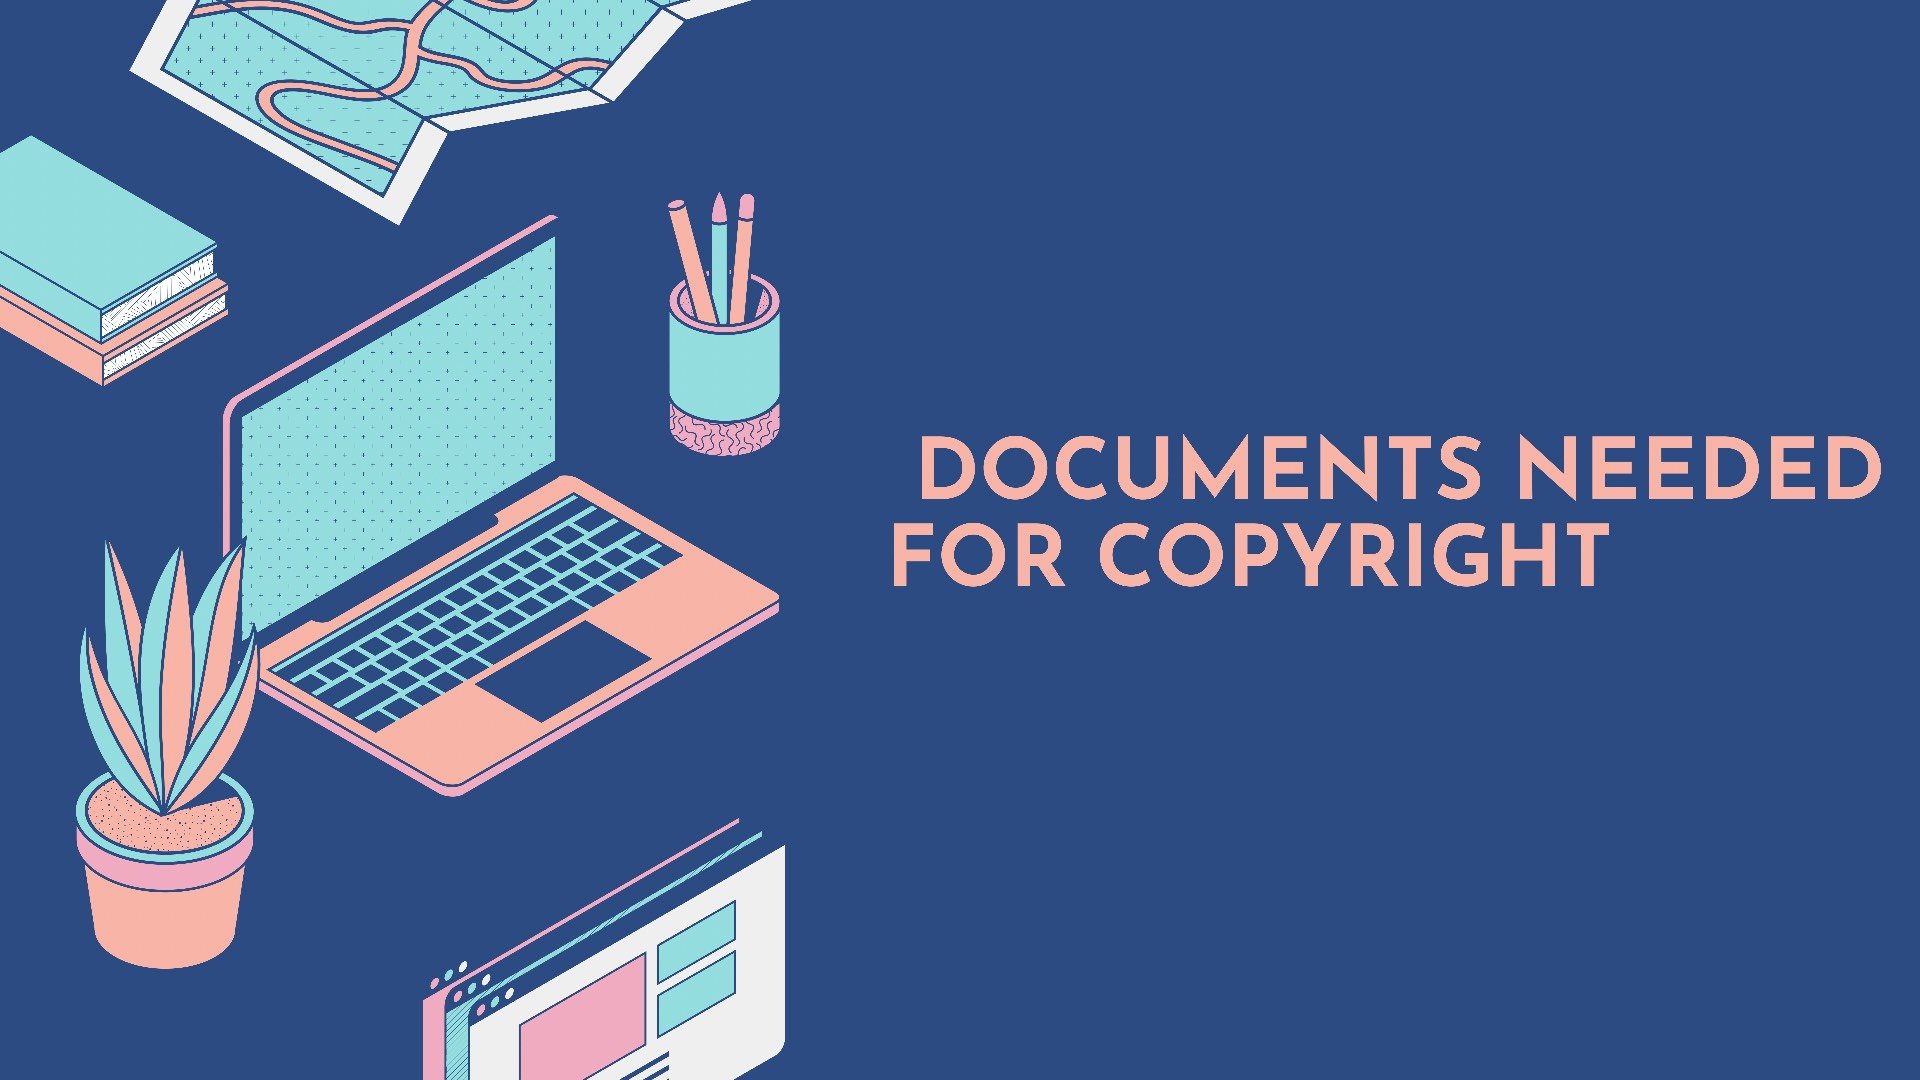 DOCUMENTS NEEDED FOR COPYRIGHT